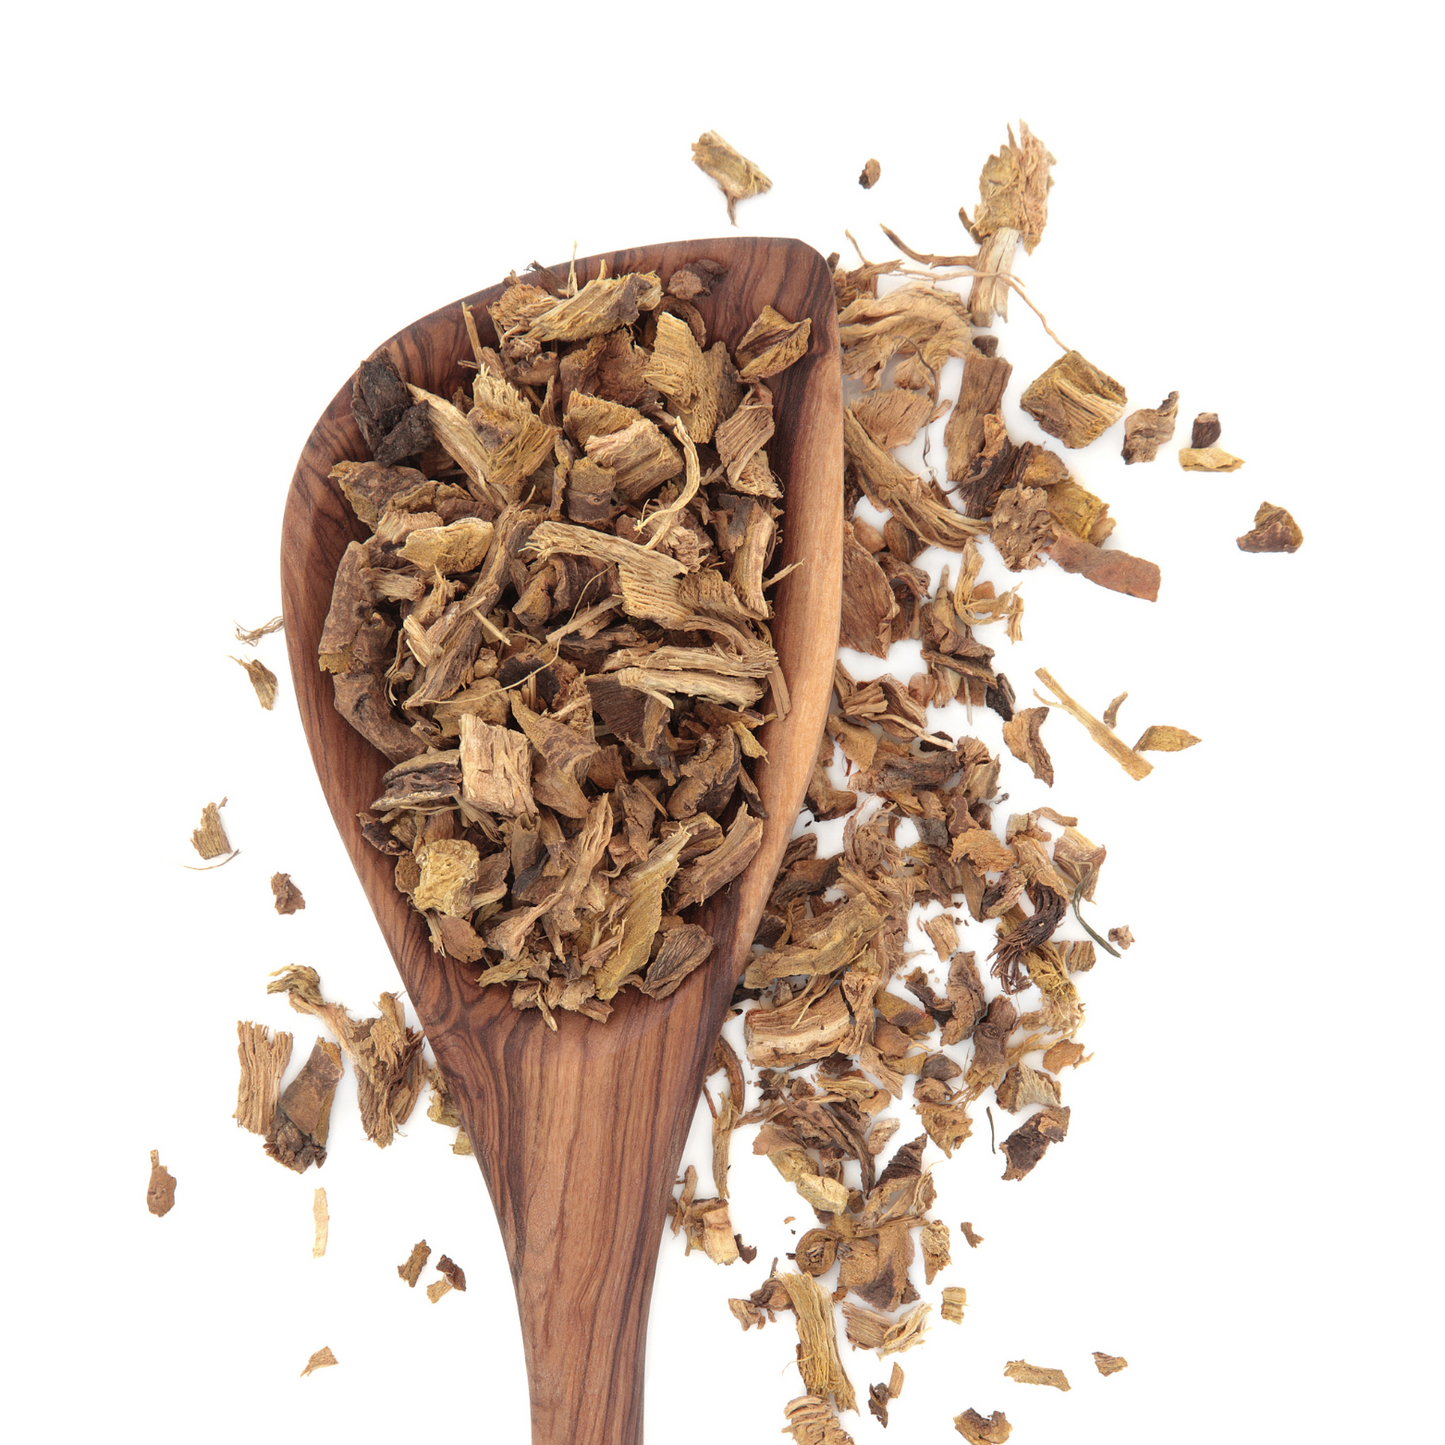 Yellow Dock Root For Blood Purification, Smudging For Ritual to Release Past Traumas